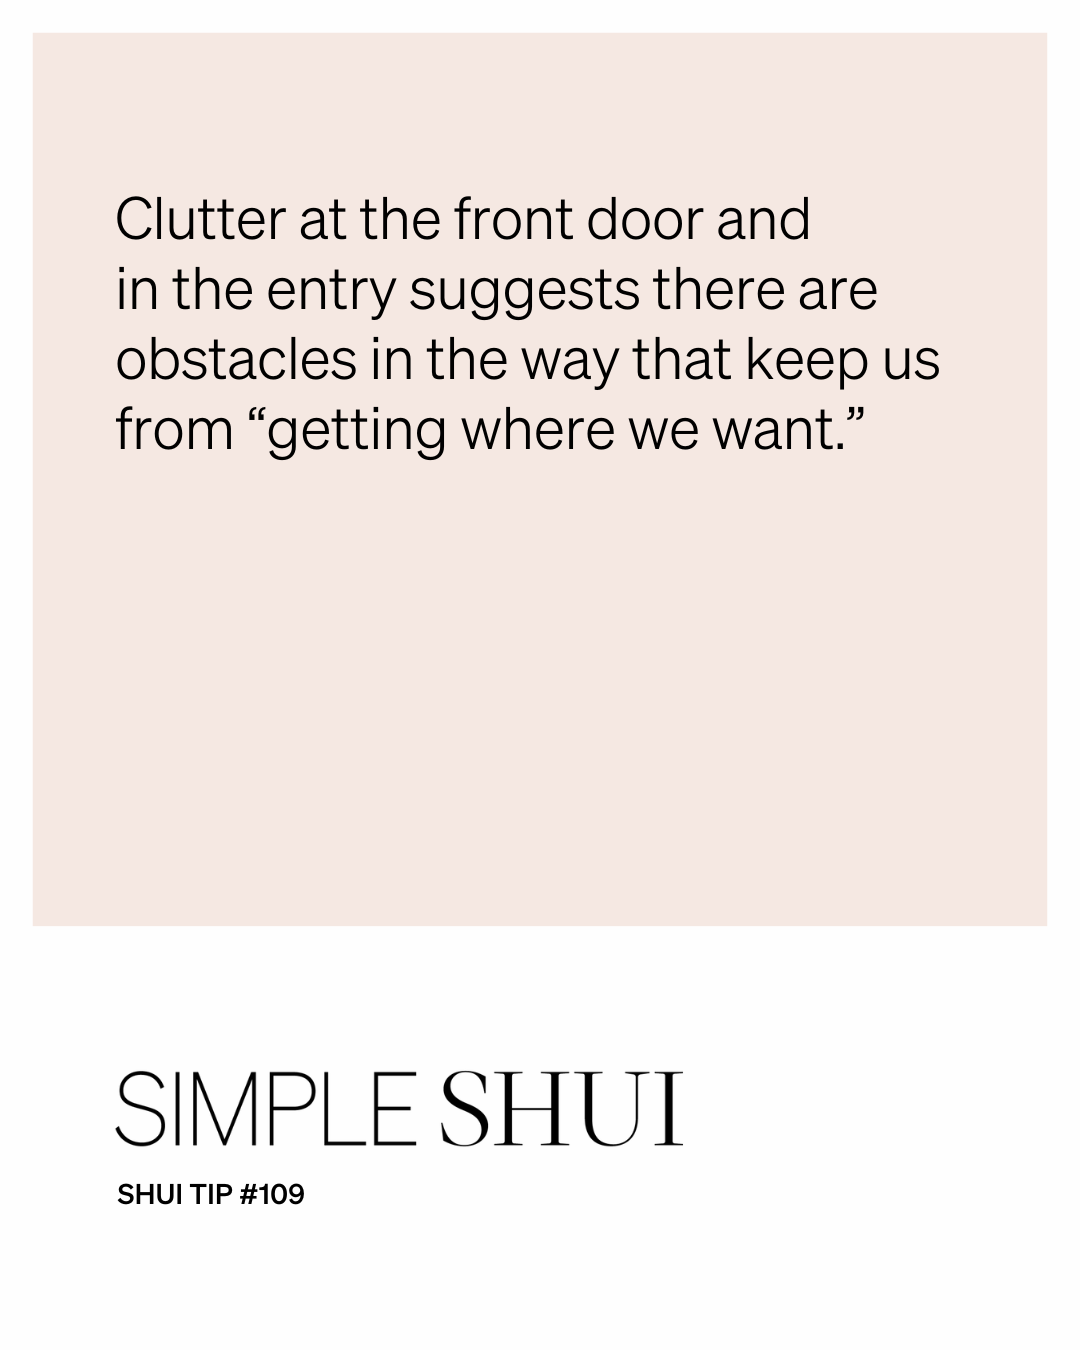 simple shui tip: clear your clutter accordingly